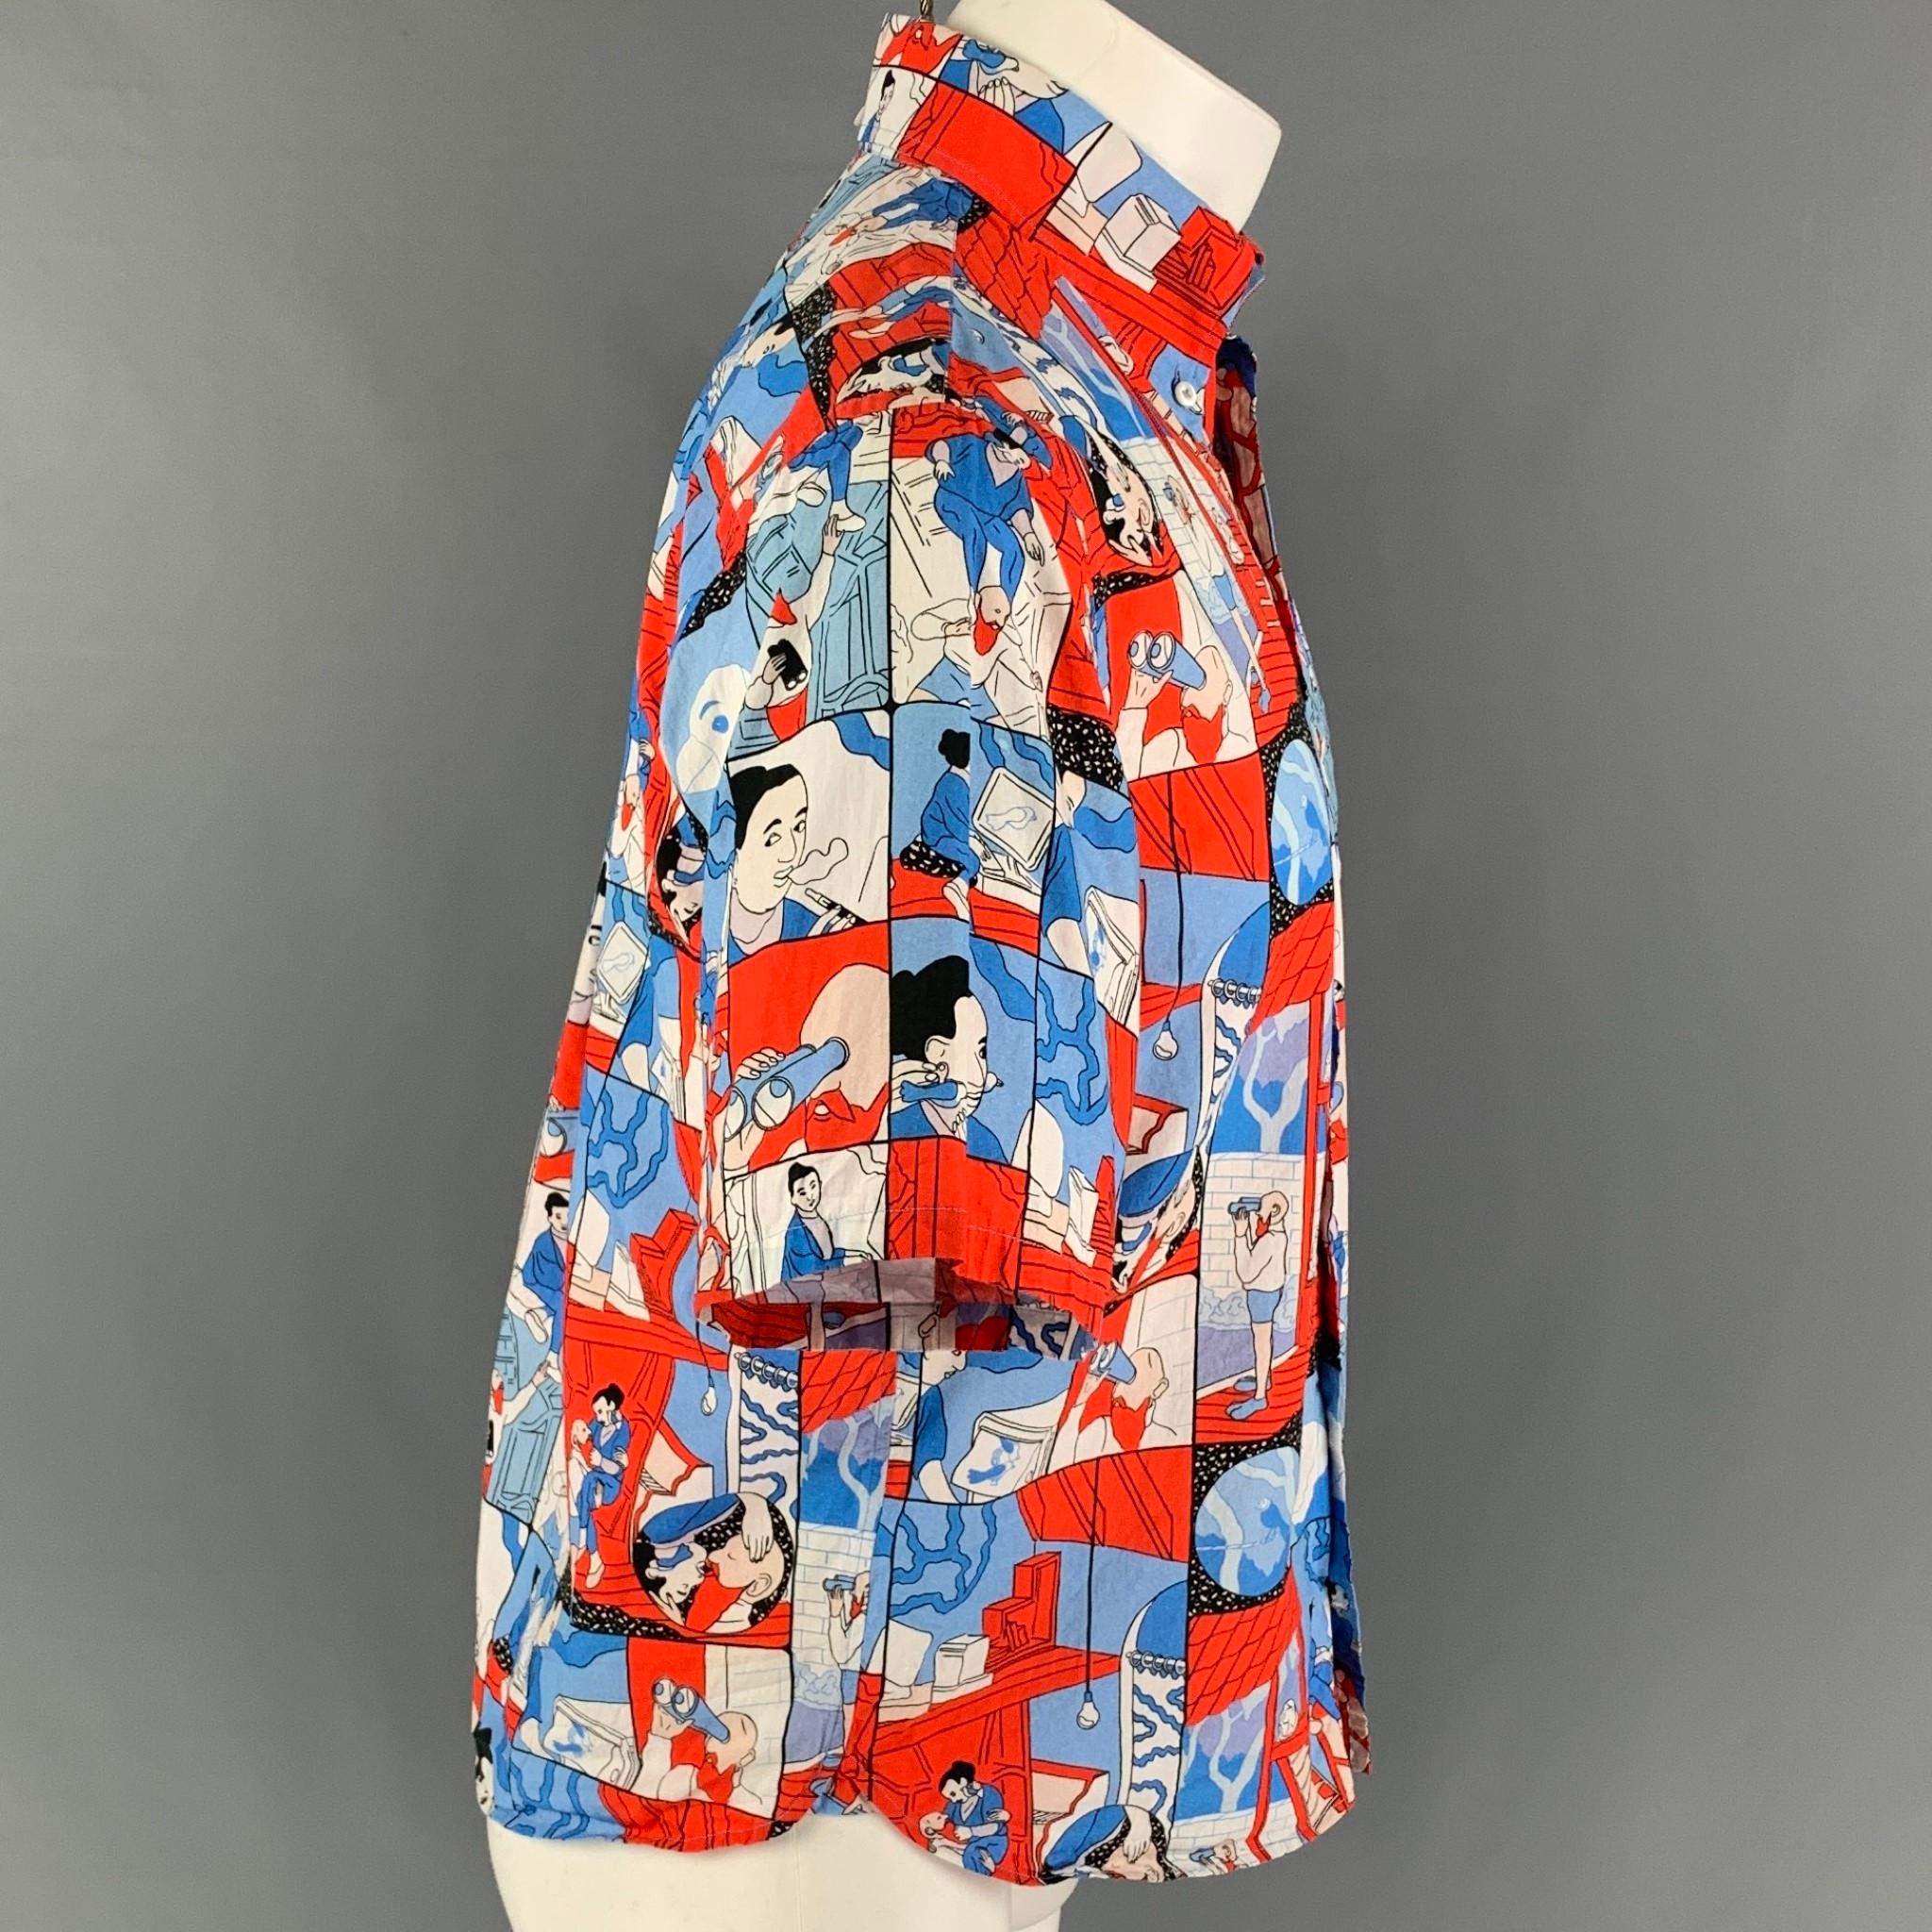 PRADA SS2018 'Comic Collection' short sleeve shirt comes in a red & blue graphic print cotton featuring a button down collar, patch pocket, and a button up closure. Made in Italy. 

Very Good Pre-Owned Condition.
Marked: S

Measurements:

Shoulder: